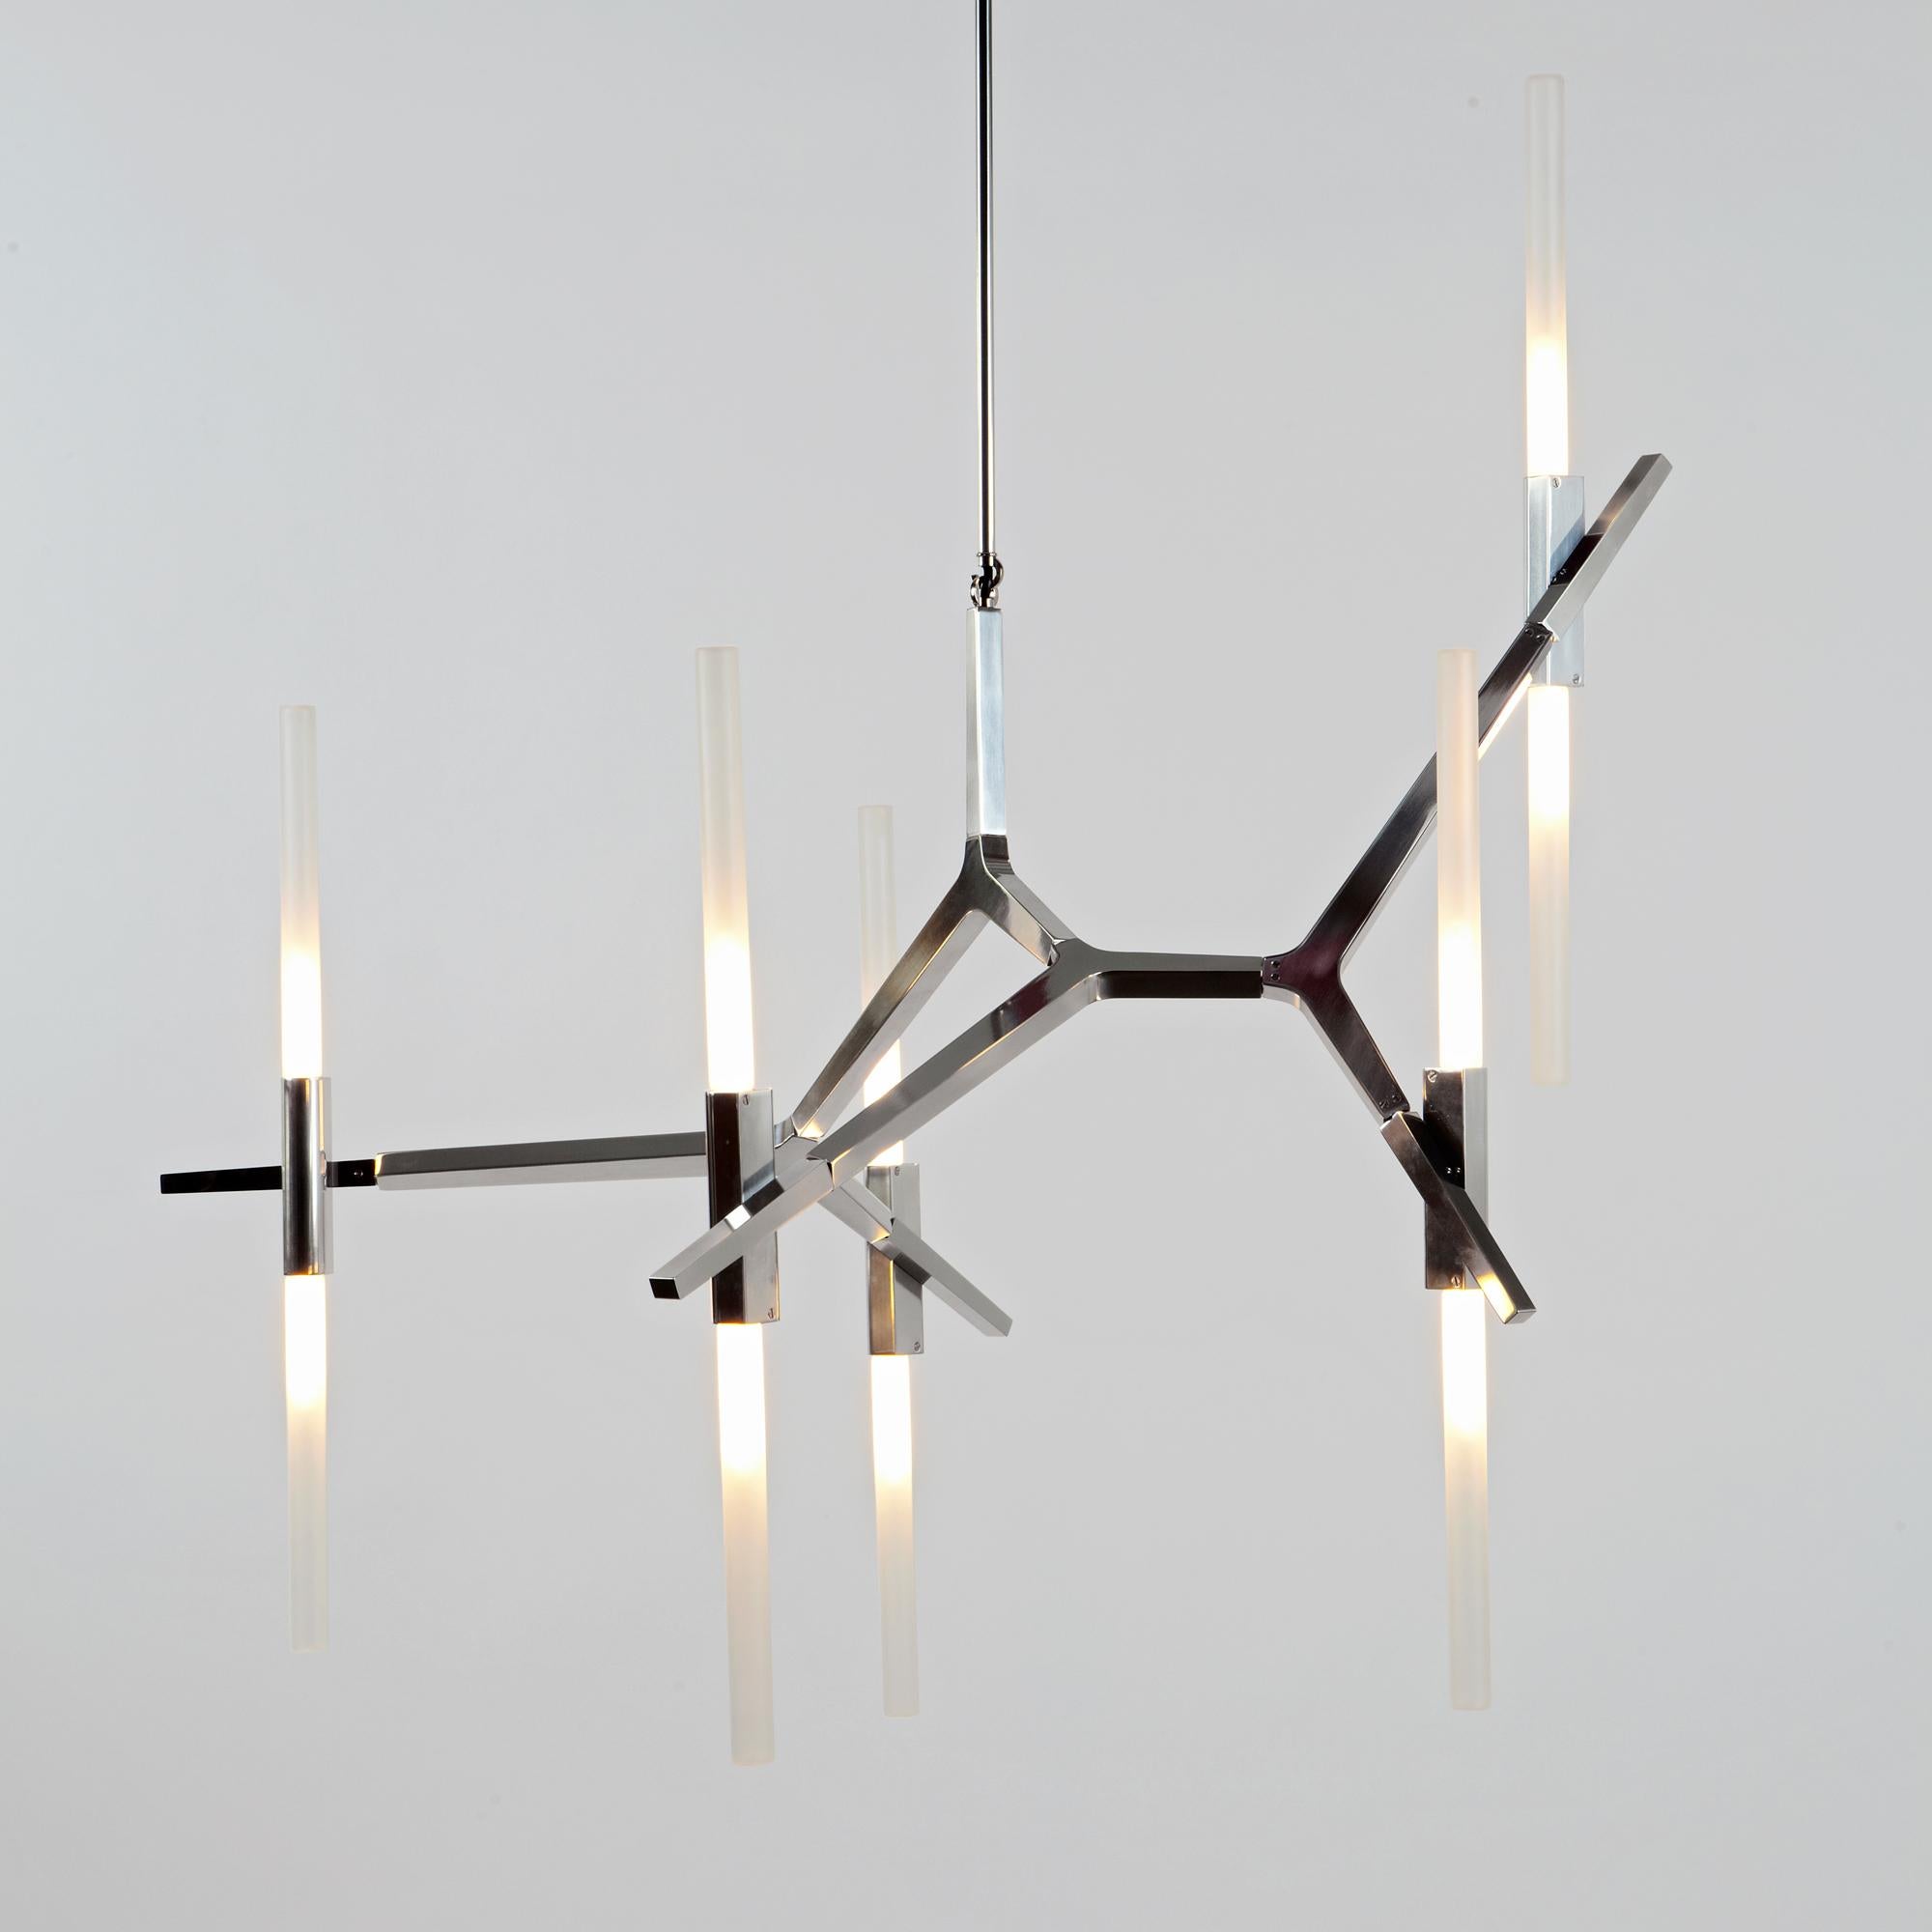 Originally conceived as a candelabra, Agnes takes its inspiration from the fictional heroine of the same name, a worker in the world's oldest profession during the 1849 California Gold Rush. The modular system would allow Agnes easy setup in her